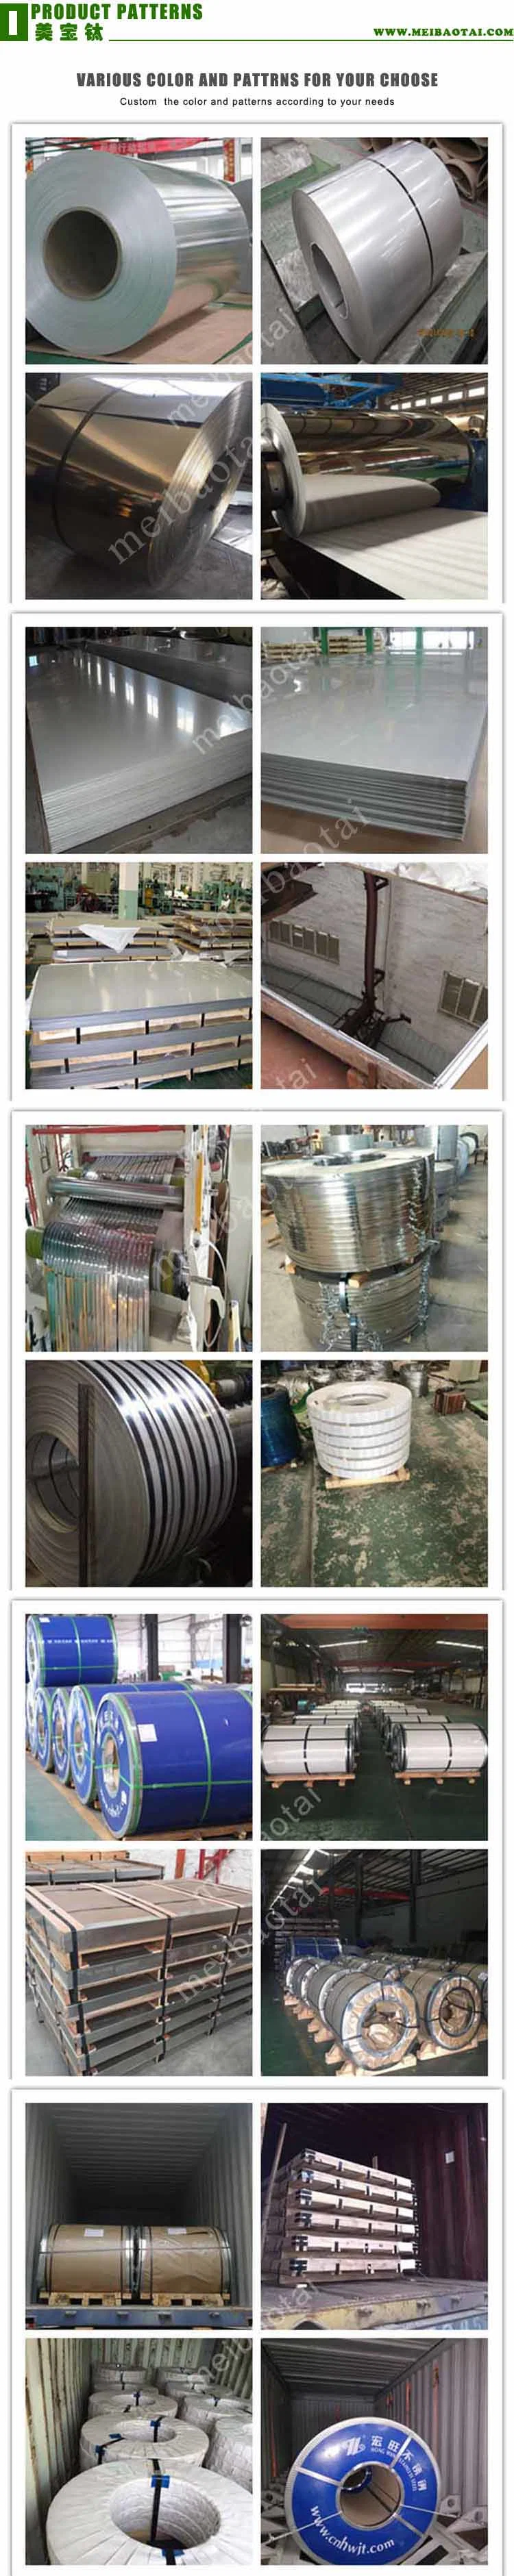 Stainless Steel Sheet 304 Price Philippines Stainless Steel 316 Metal Sheet for Fabrication